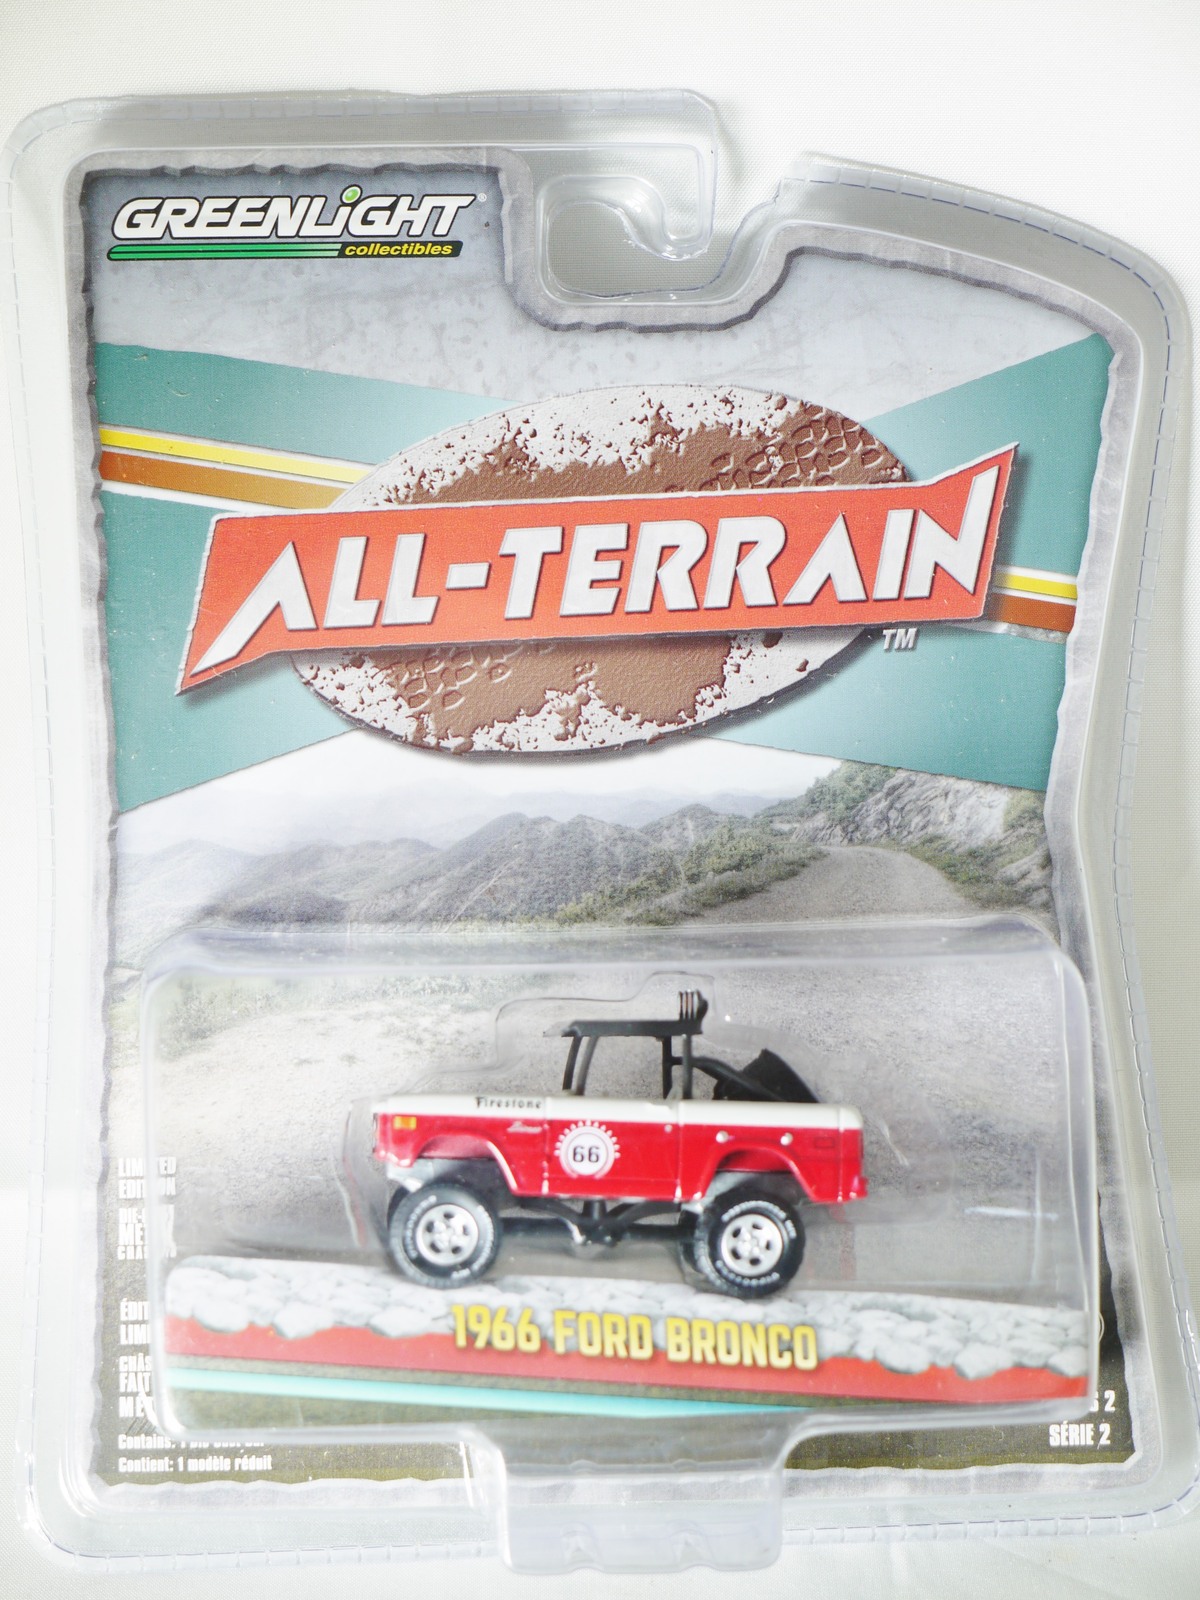 GREENLIGHT 1/64 ALL-TERRAIN Series 2 1966 FORD BRONCO Die-cast Figure Red - $25.99